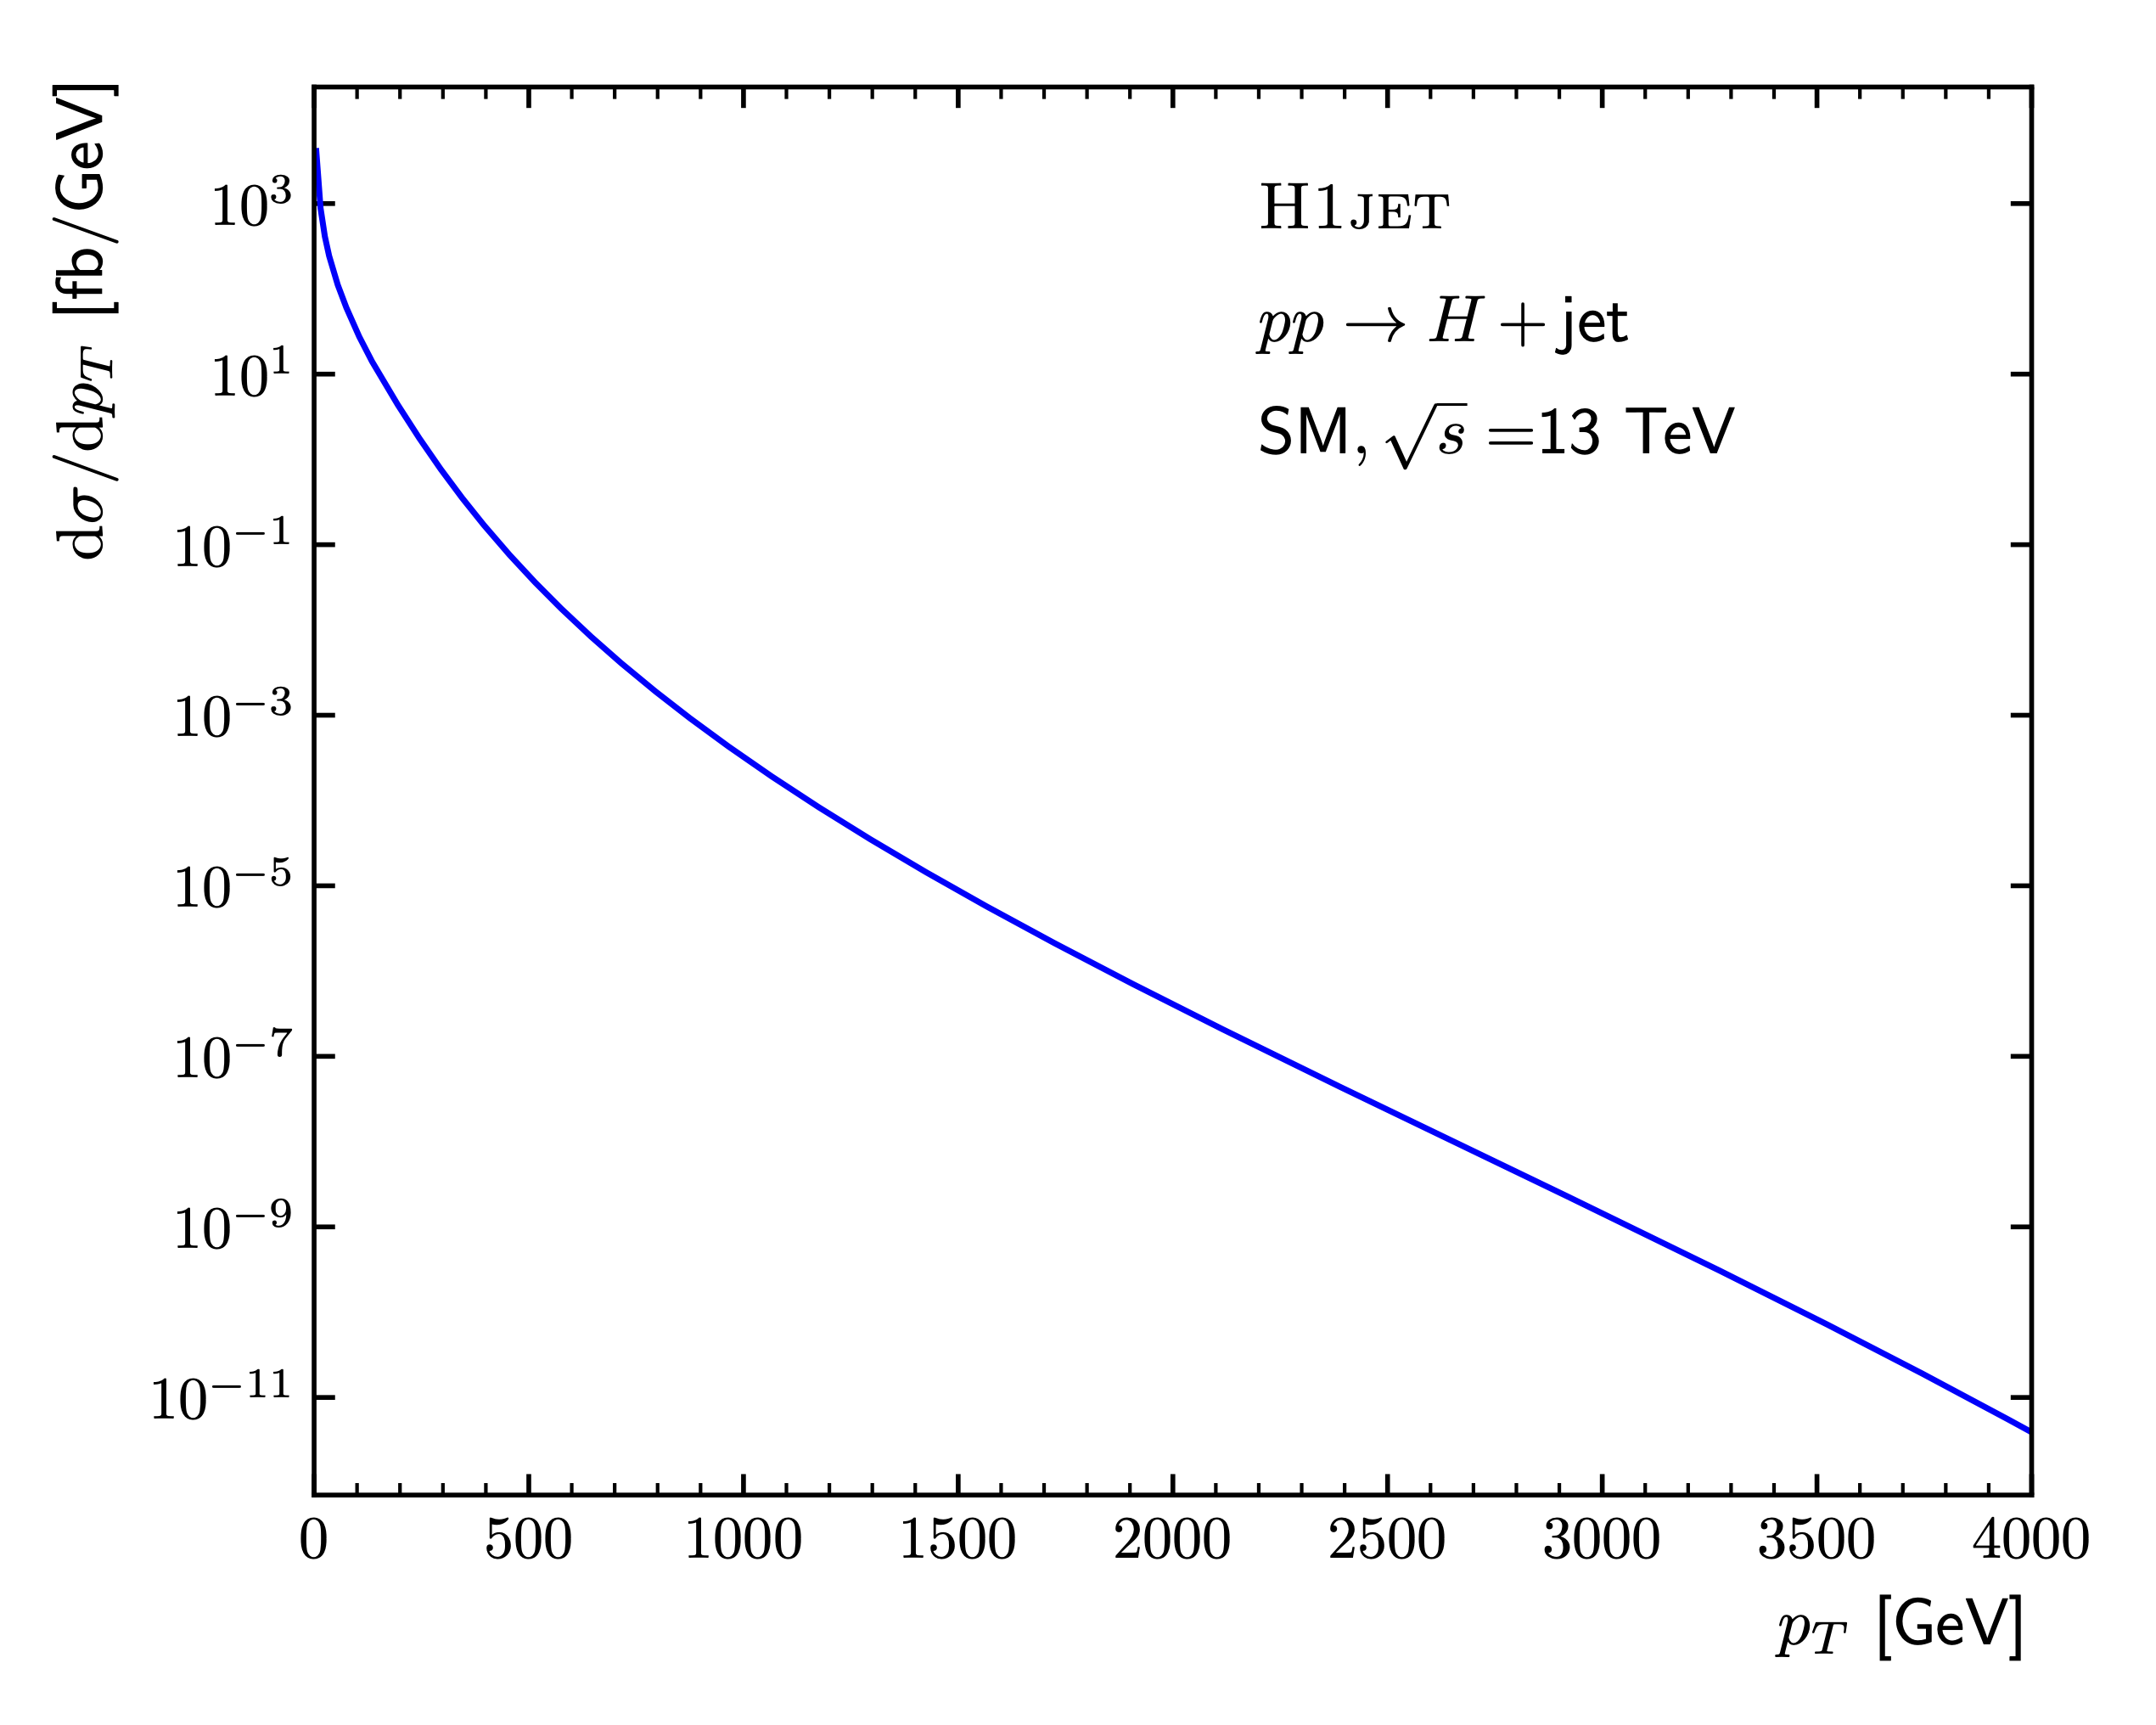 Result plot from H1jet showing the differential cross-section distribution in the transverse momentum of a Standard Model Higgs boson.